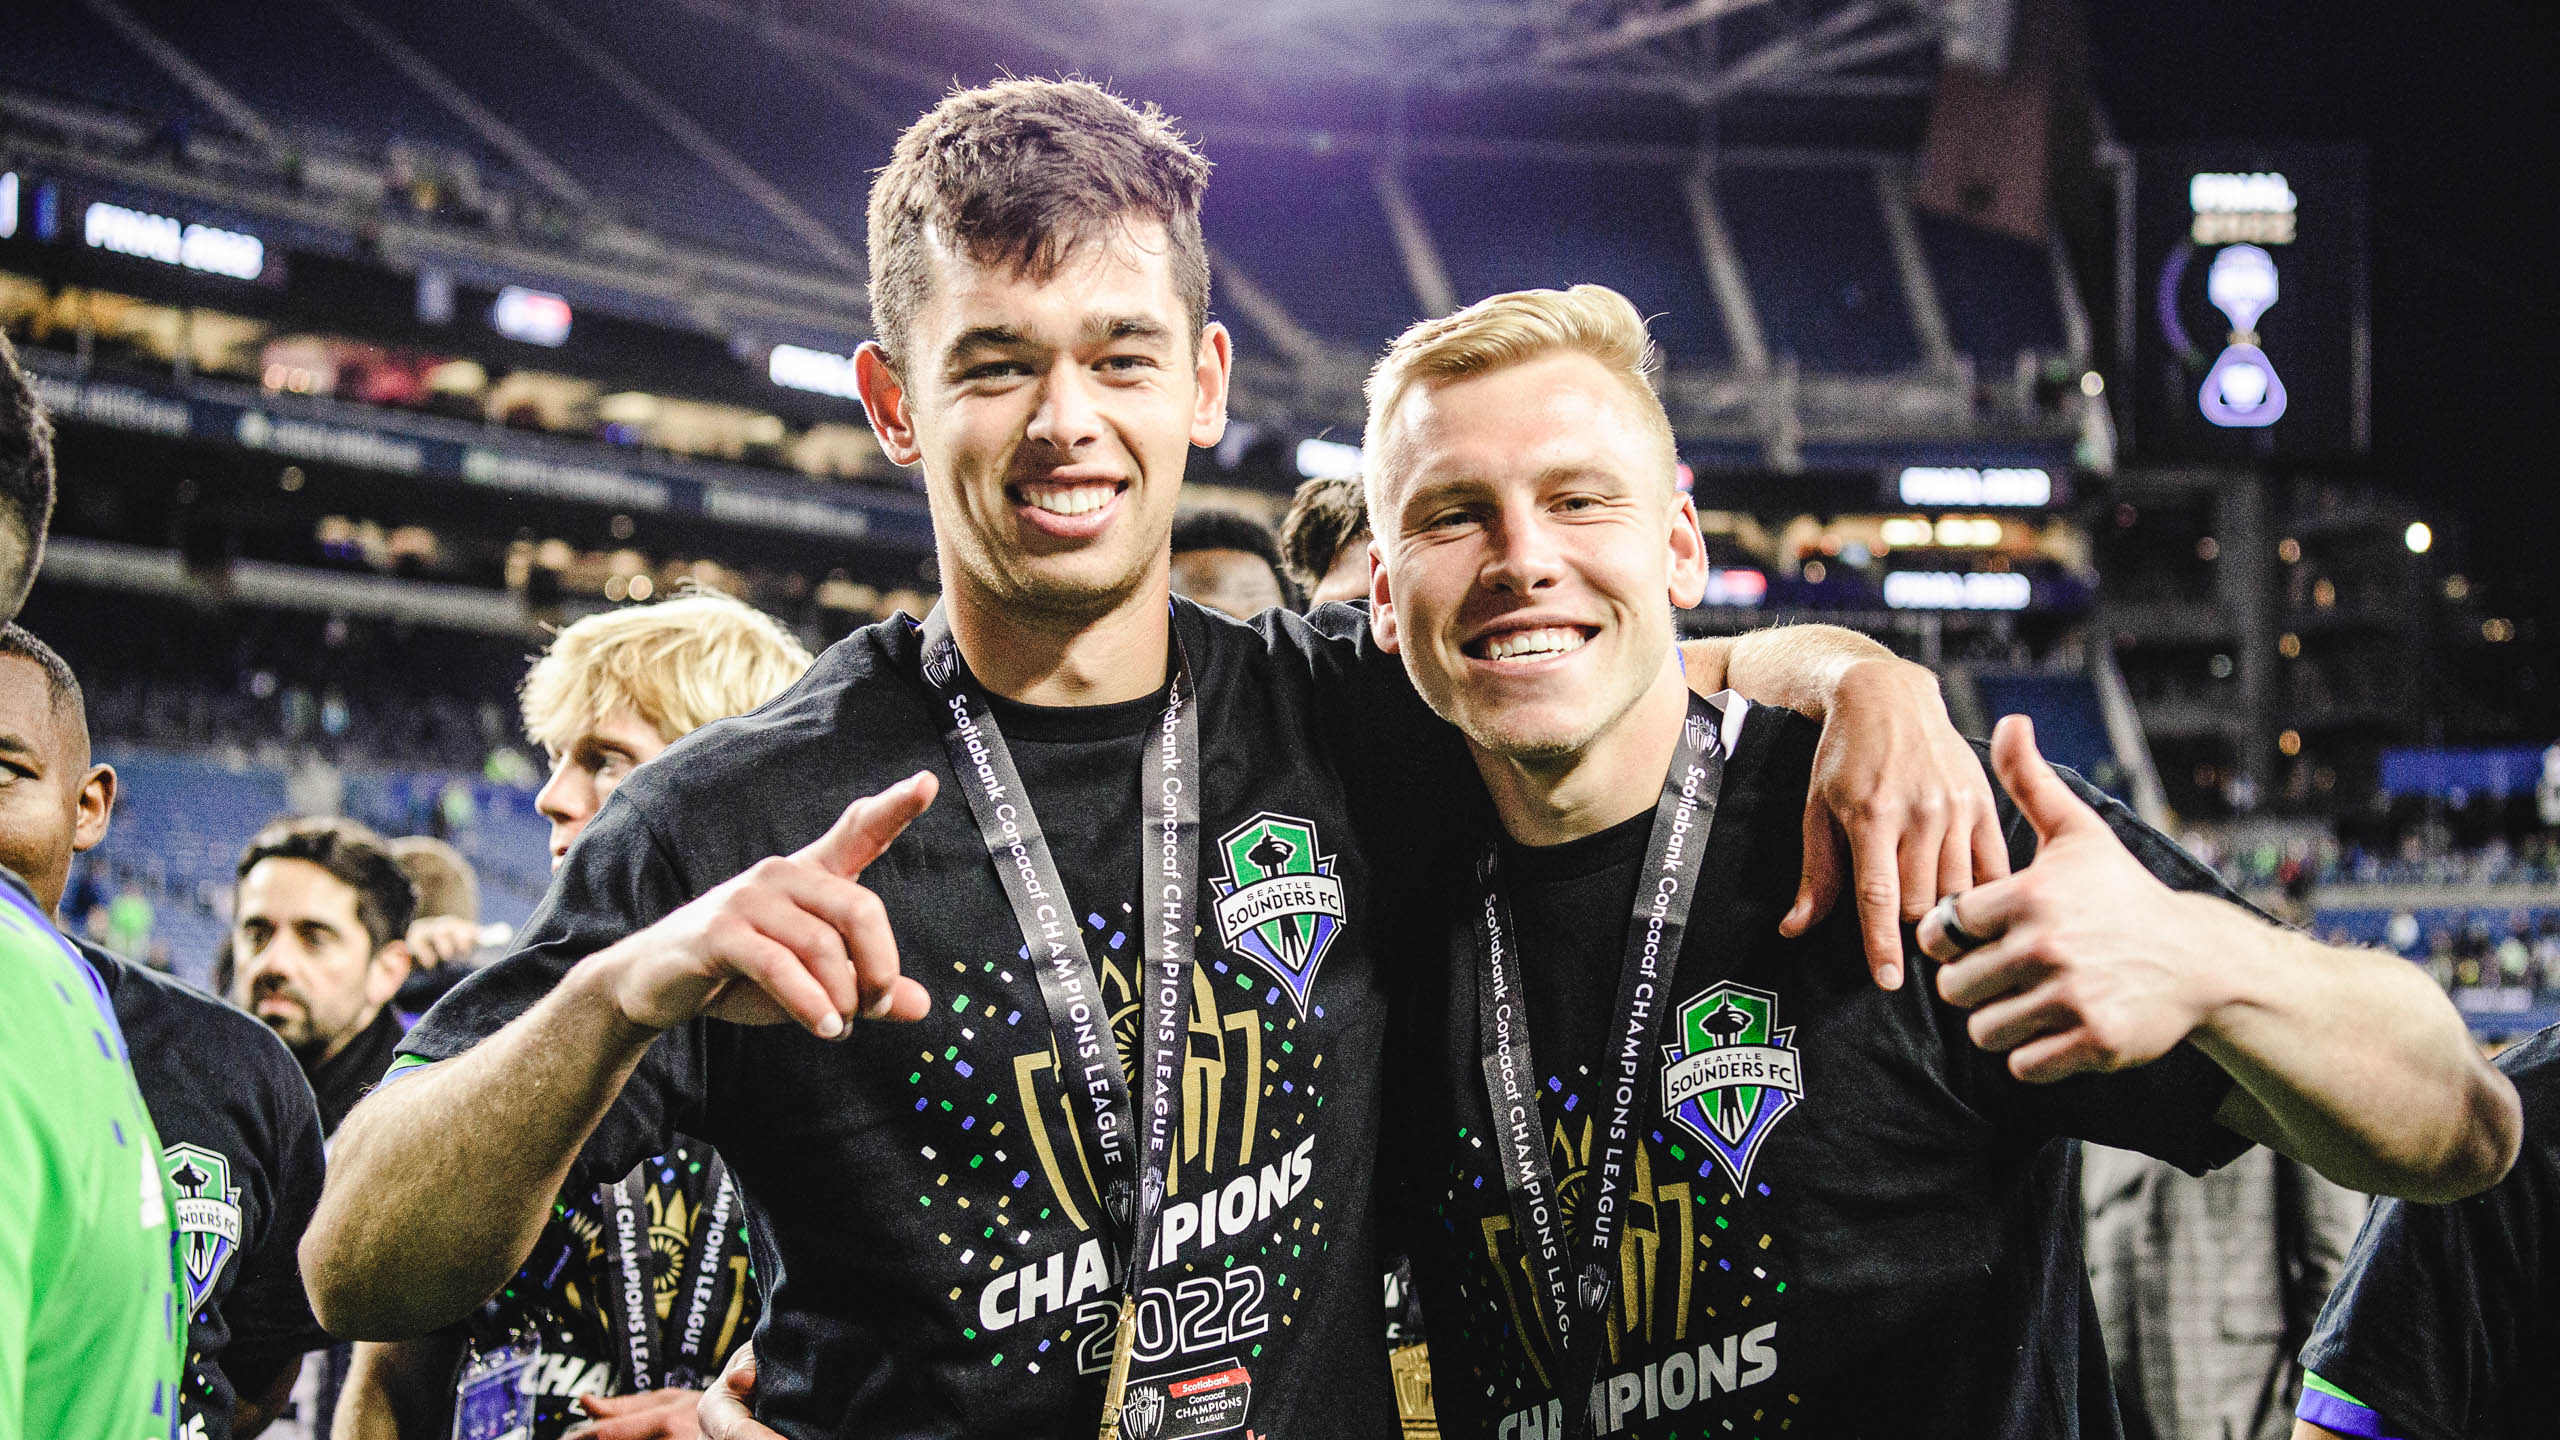 Seattle native Jackson Ragen thriving in first MLS season, relishing opportunity to play in hometown